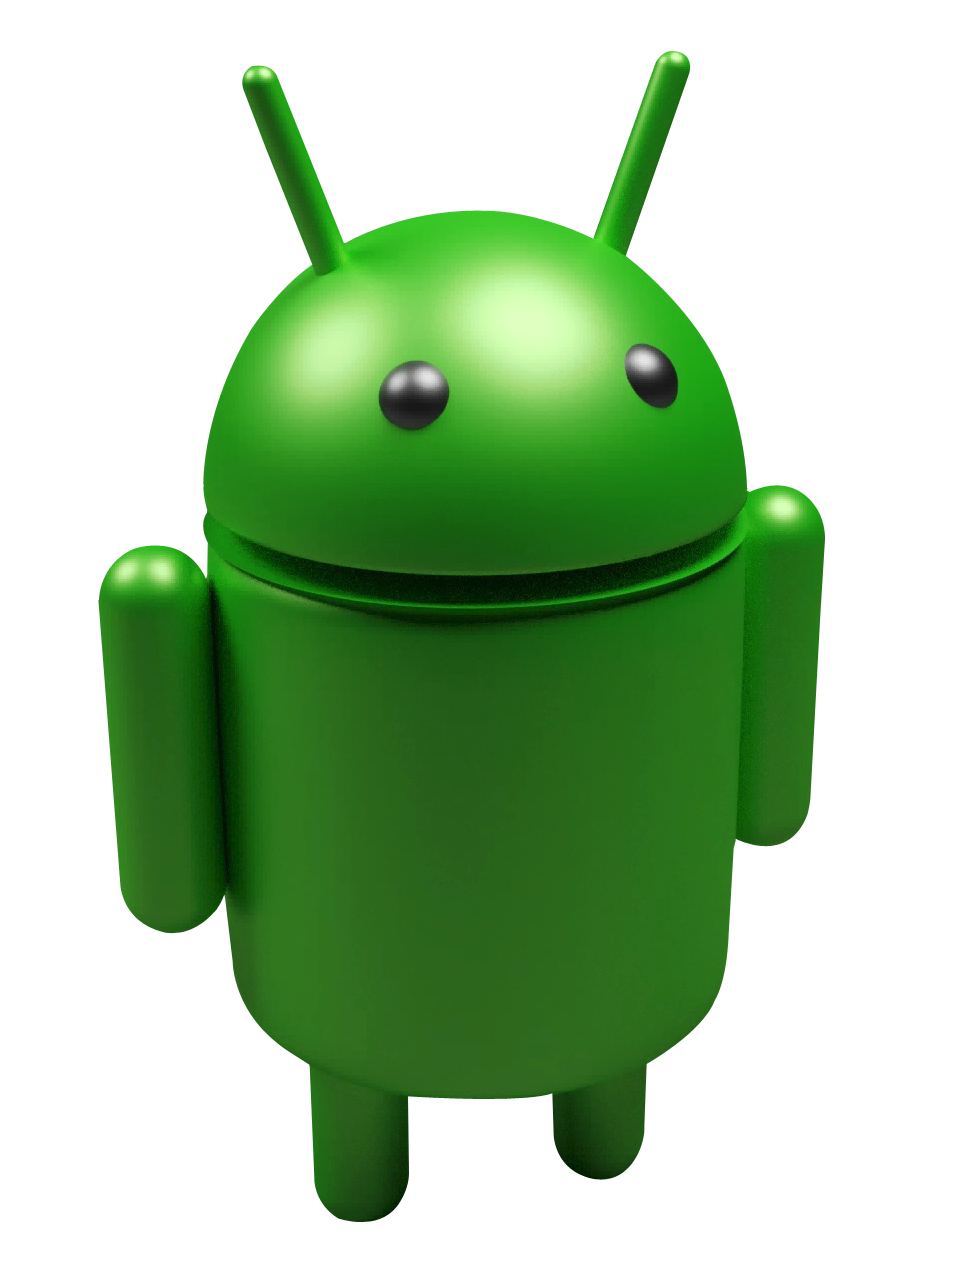 A Green Robot With Two Antenna